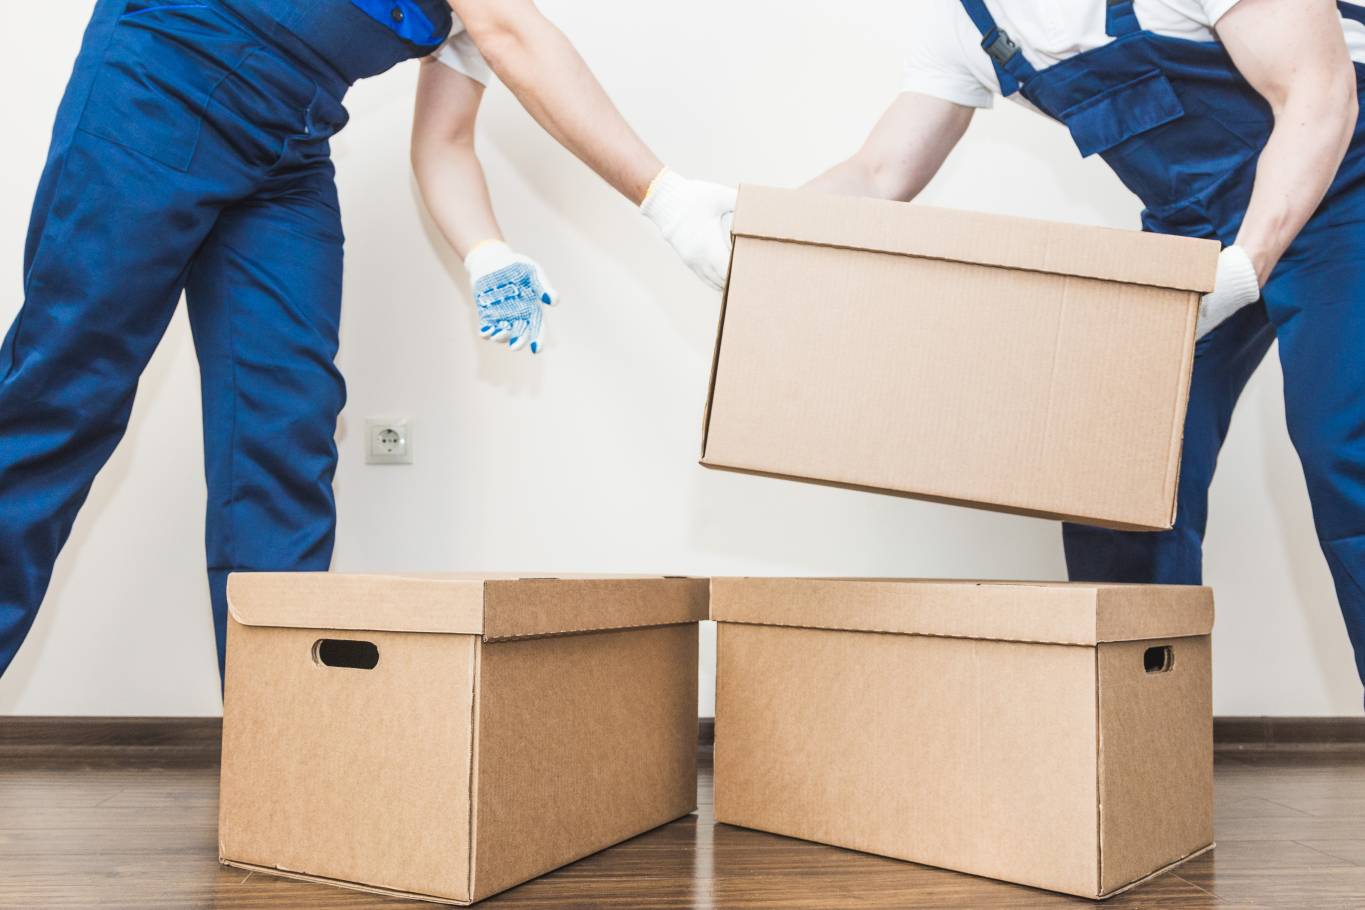 Simplifying Residential Moves with Professional Movers in Austin